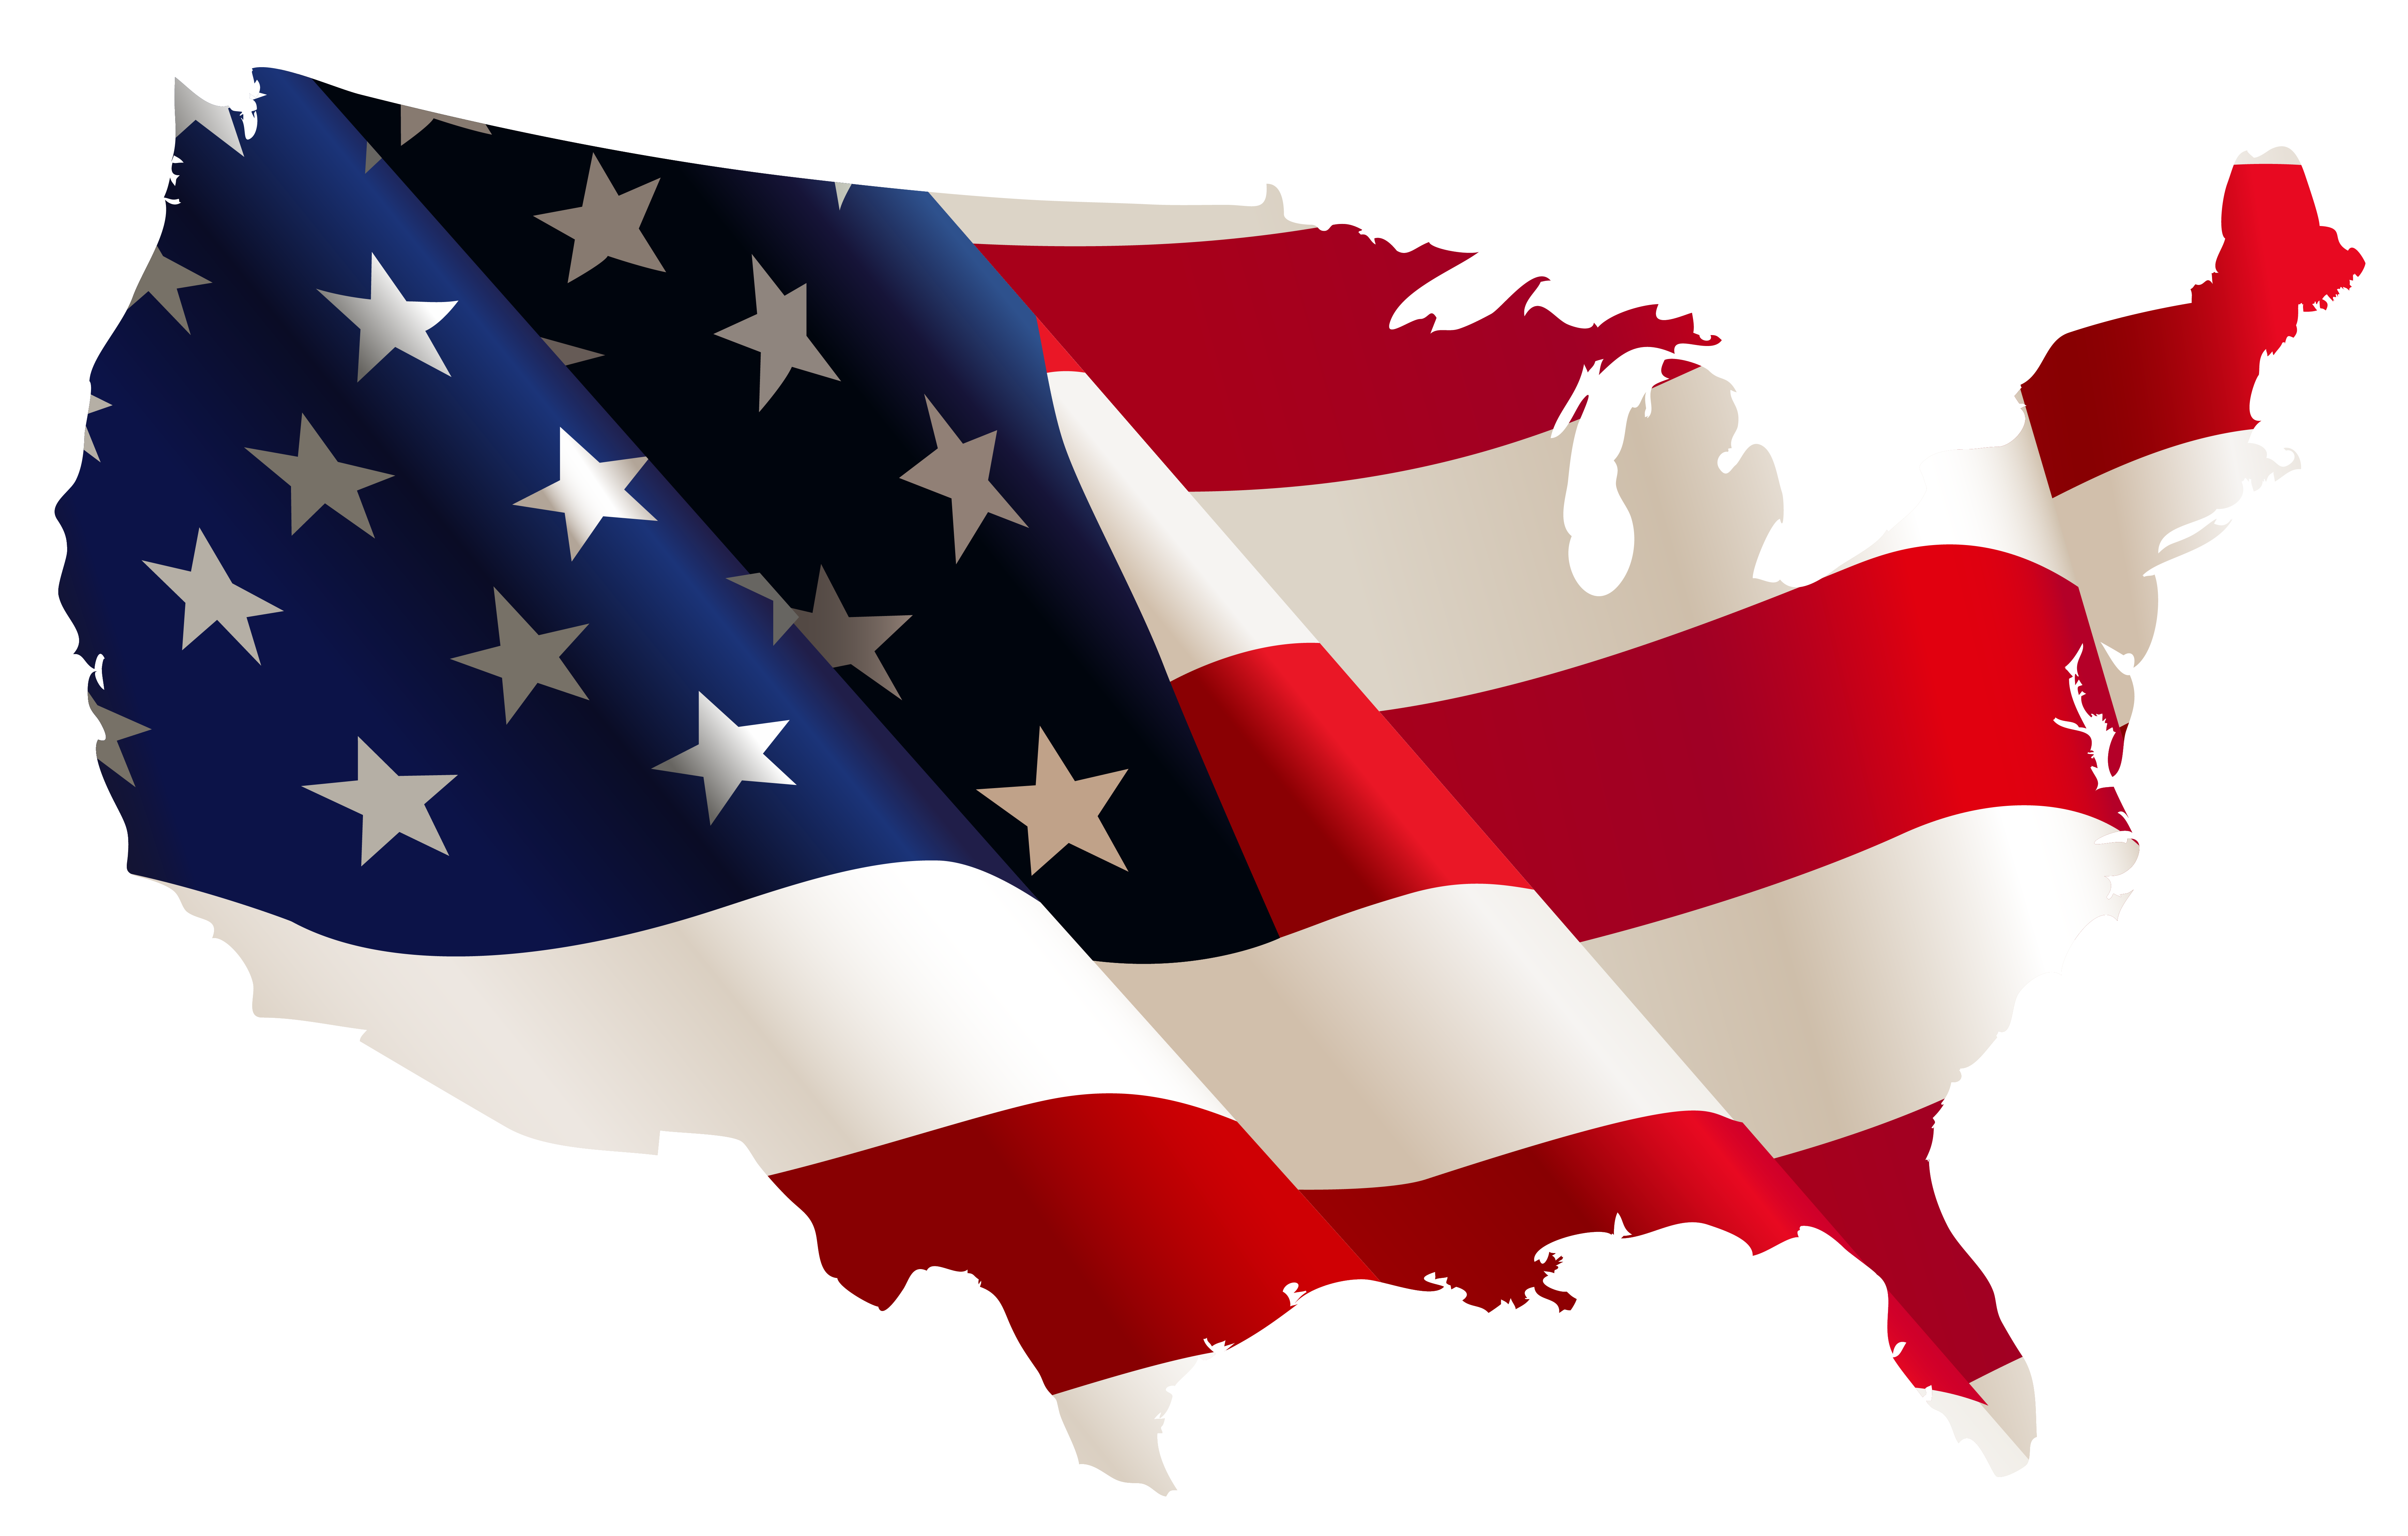 ms clipart gallery online usa map - photo #47